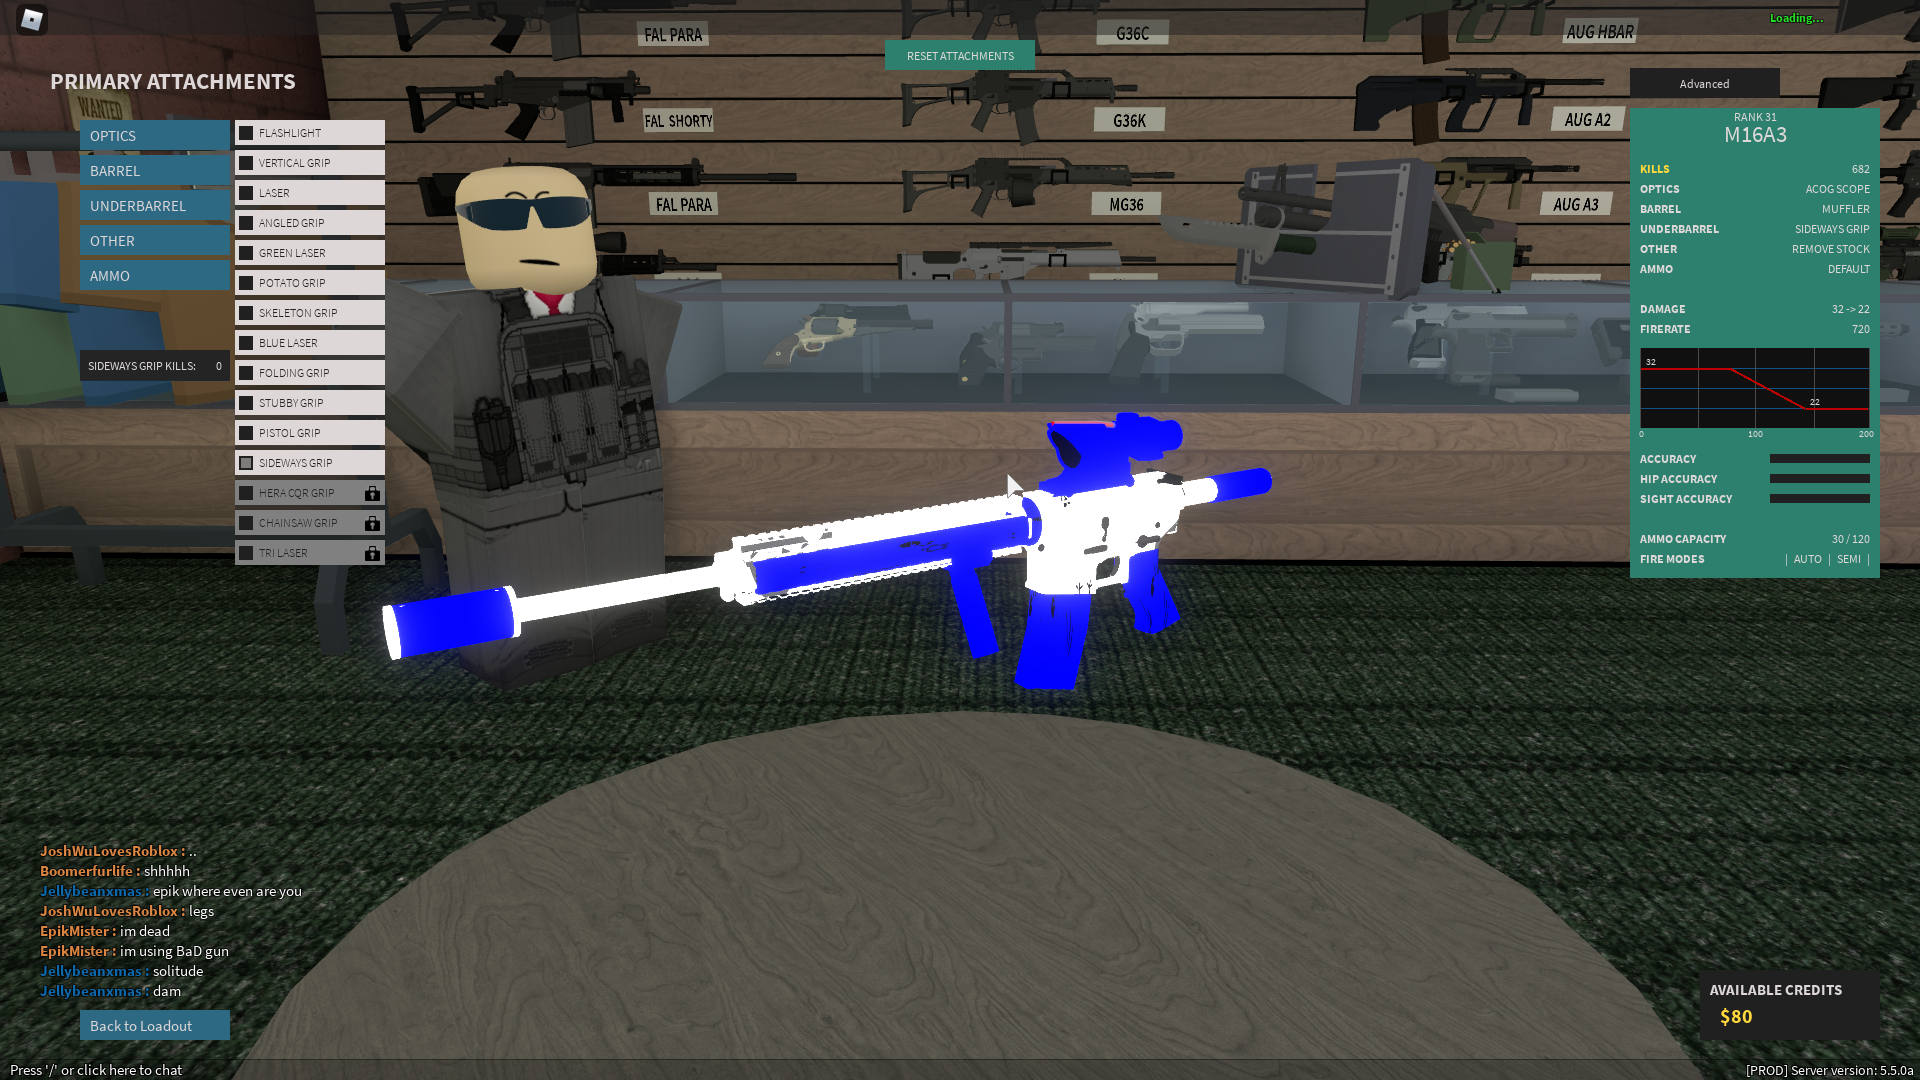 THE MOST CURSED SETUPS IN PHANTOM FORCES 